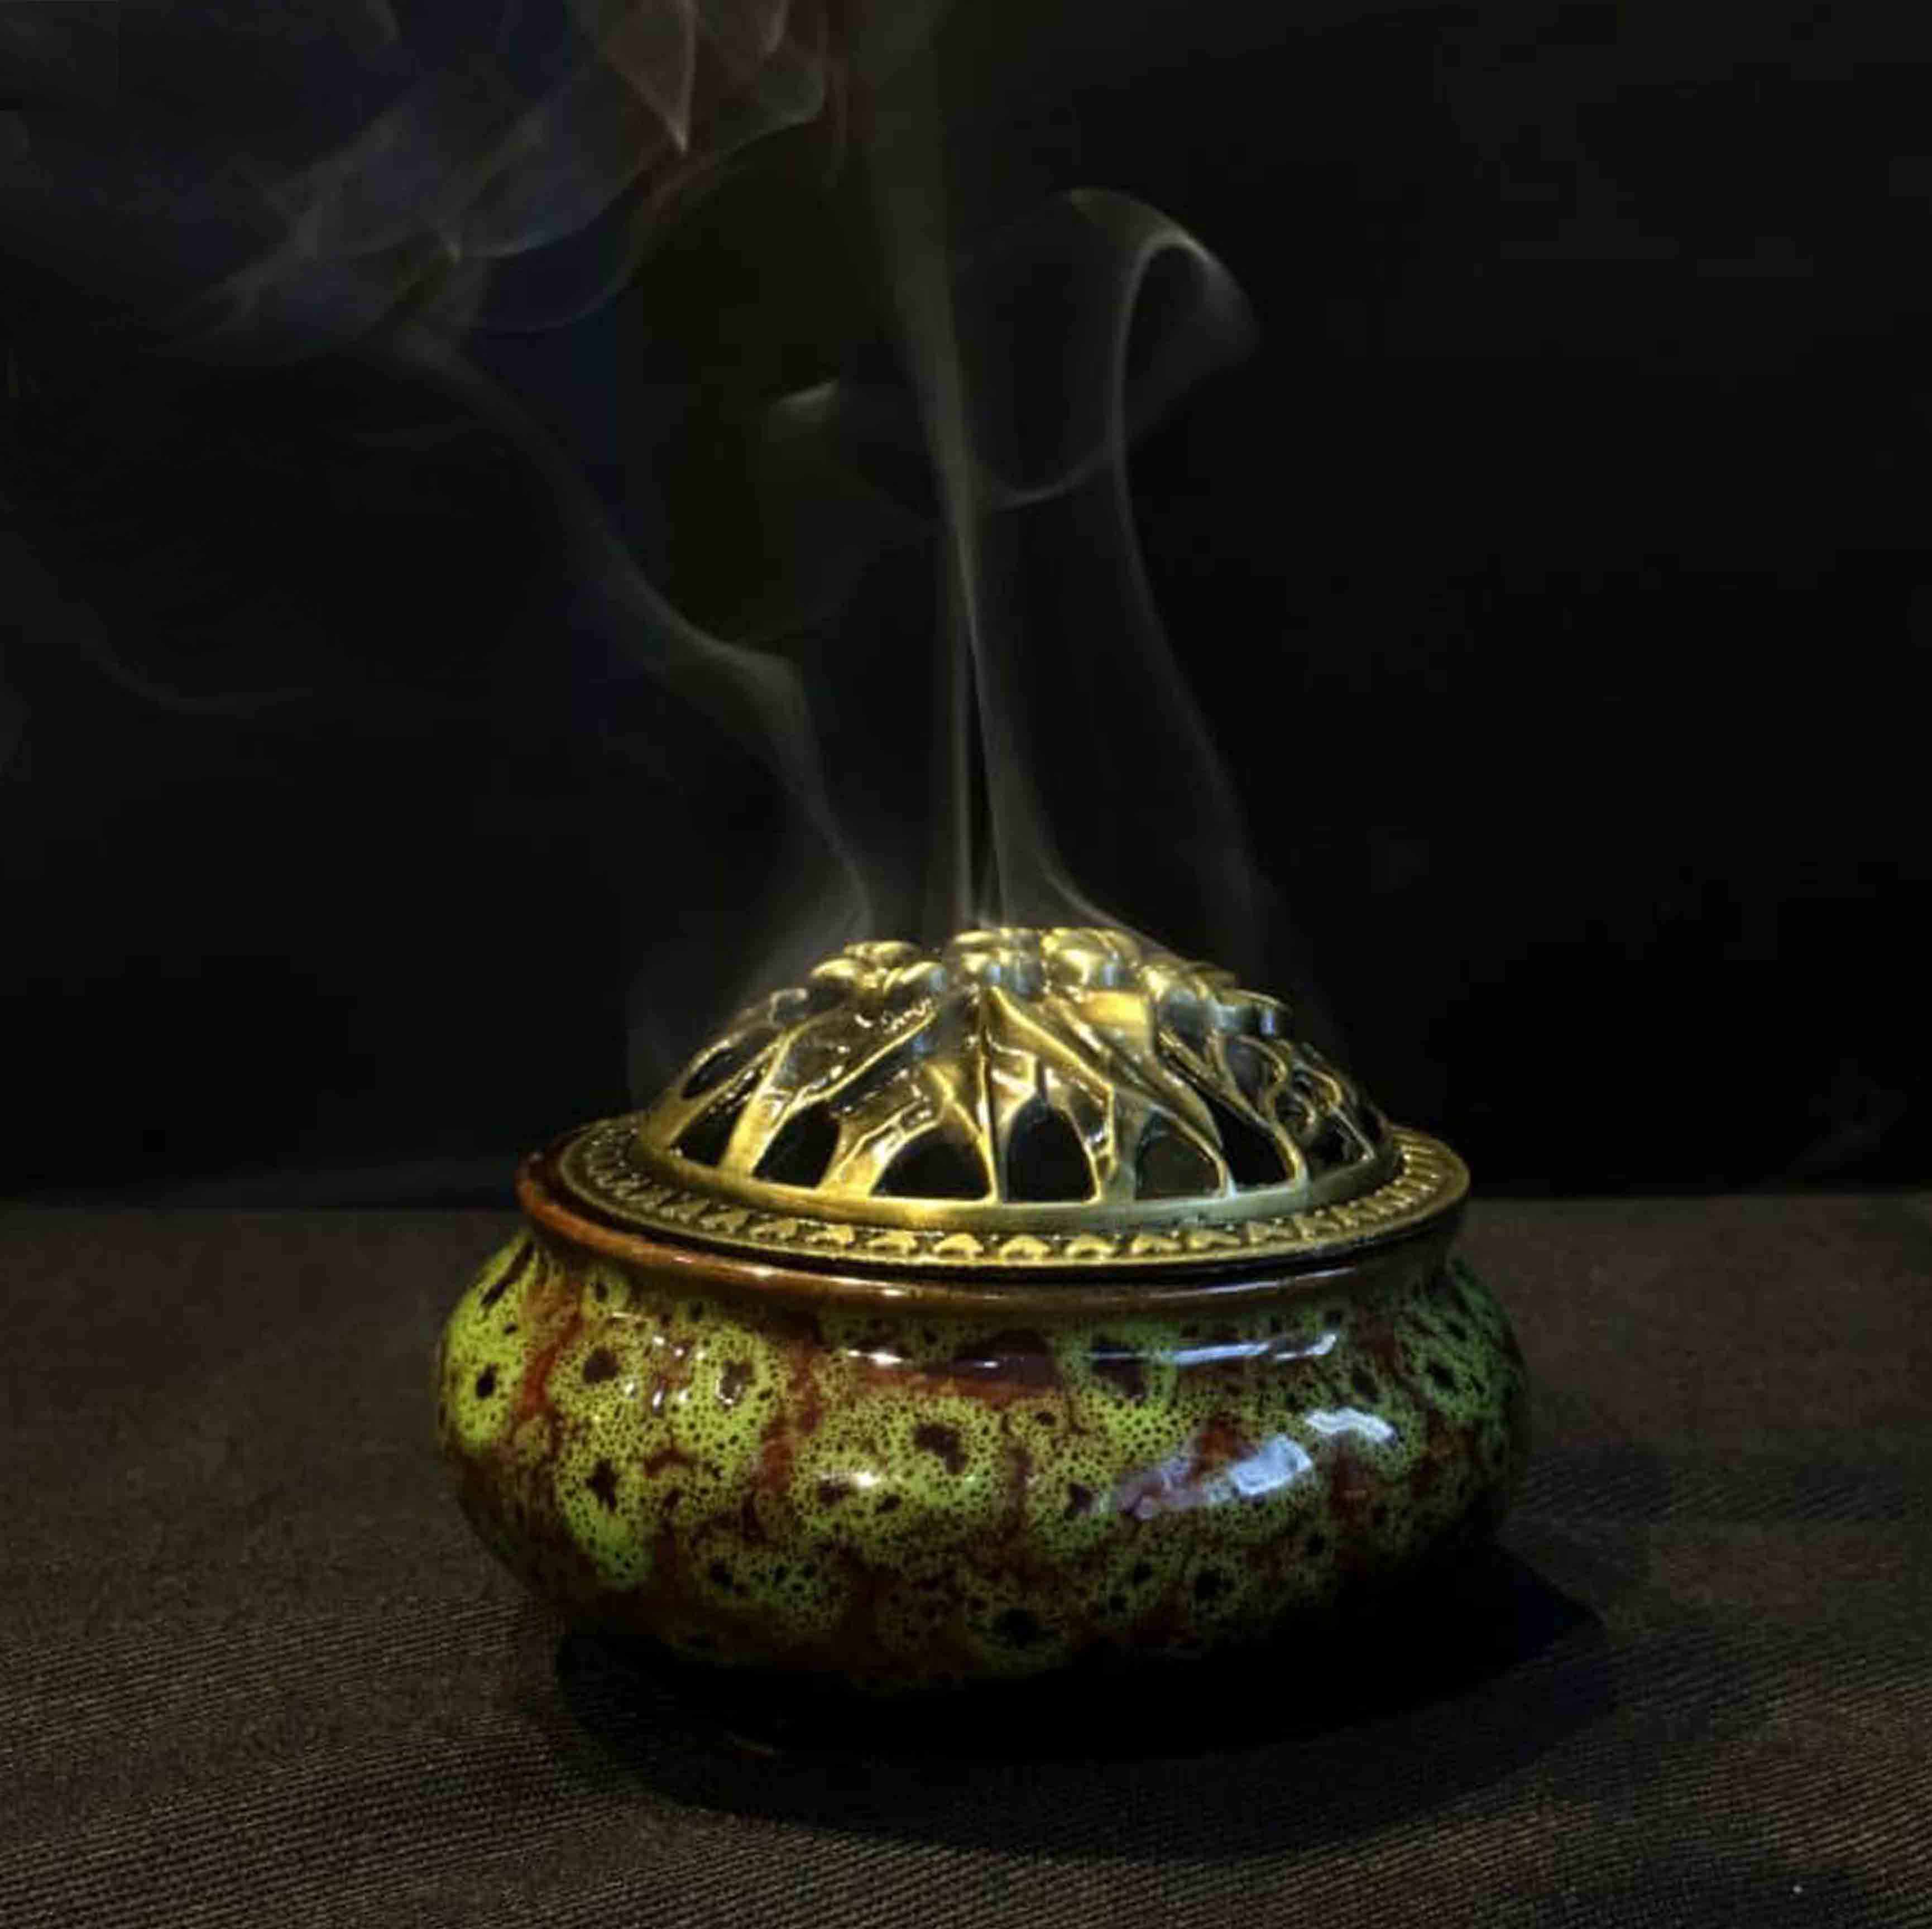 Why should you steam incense incense?